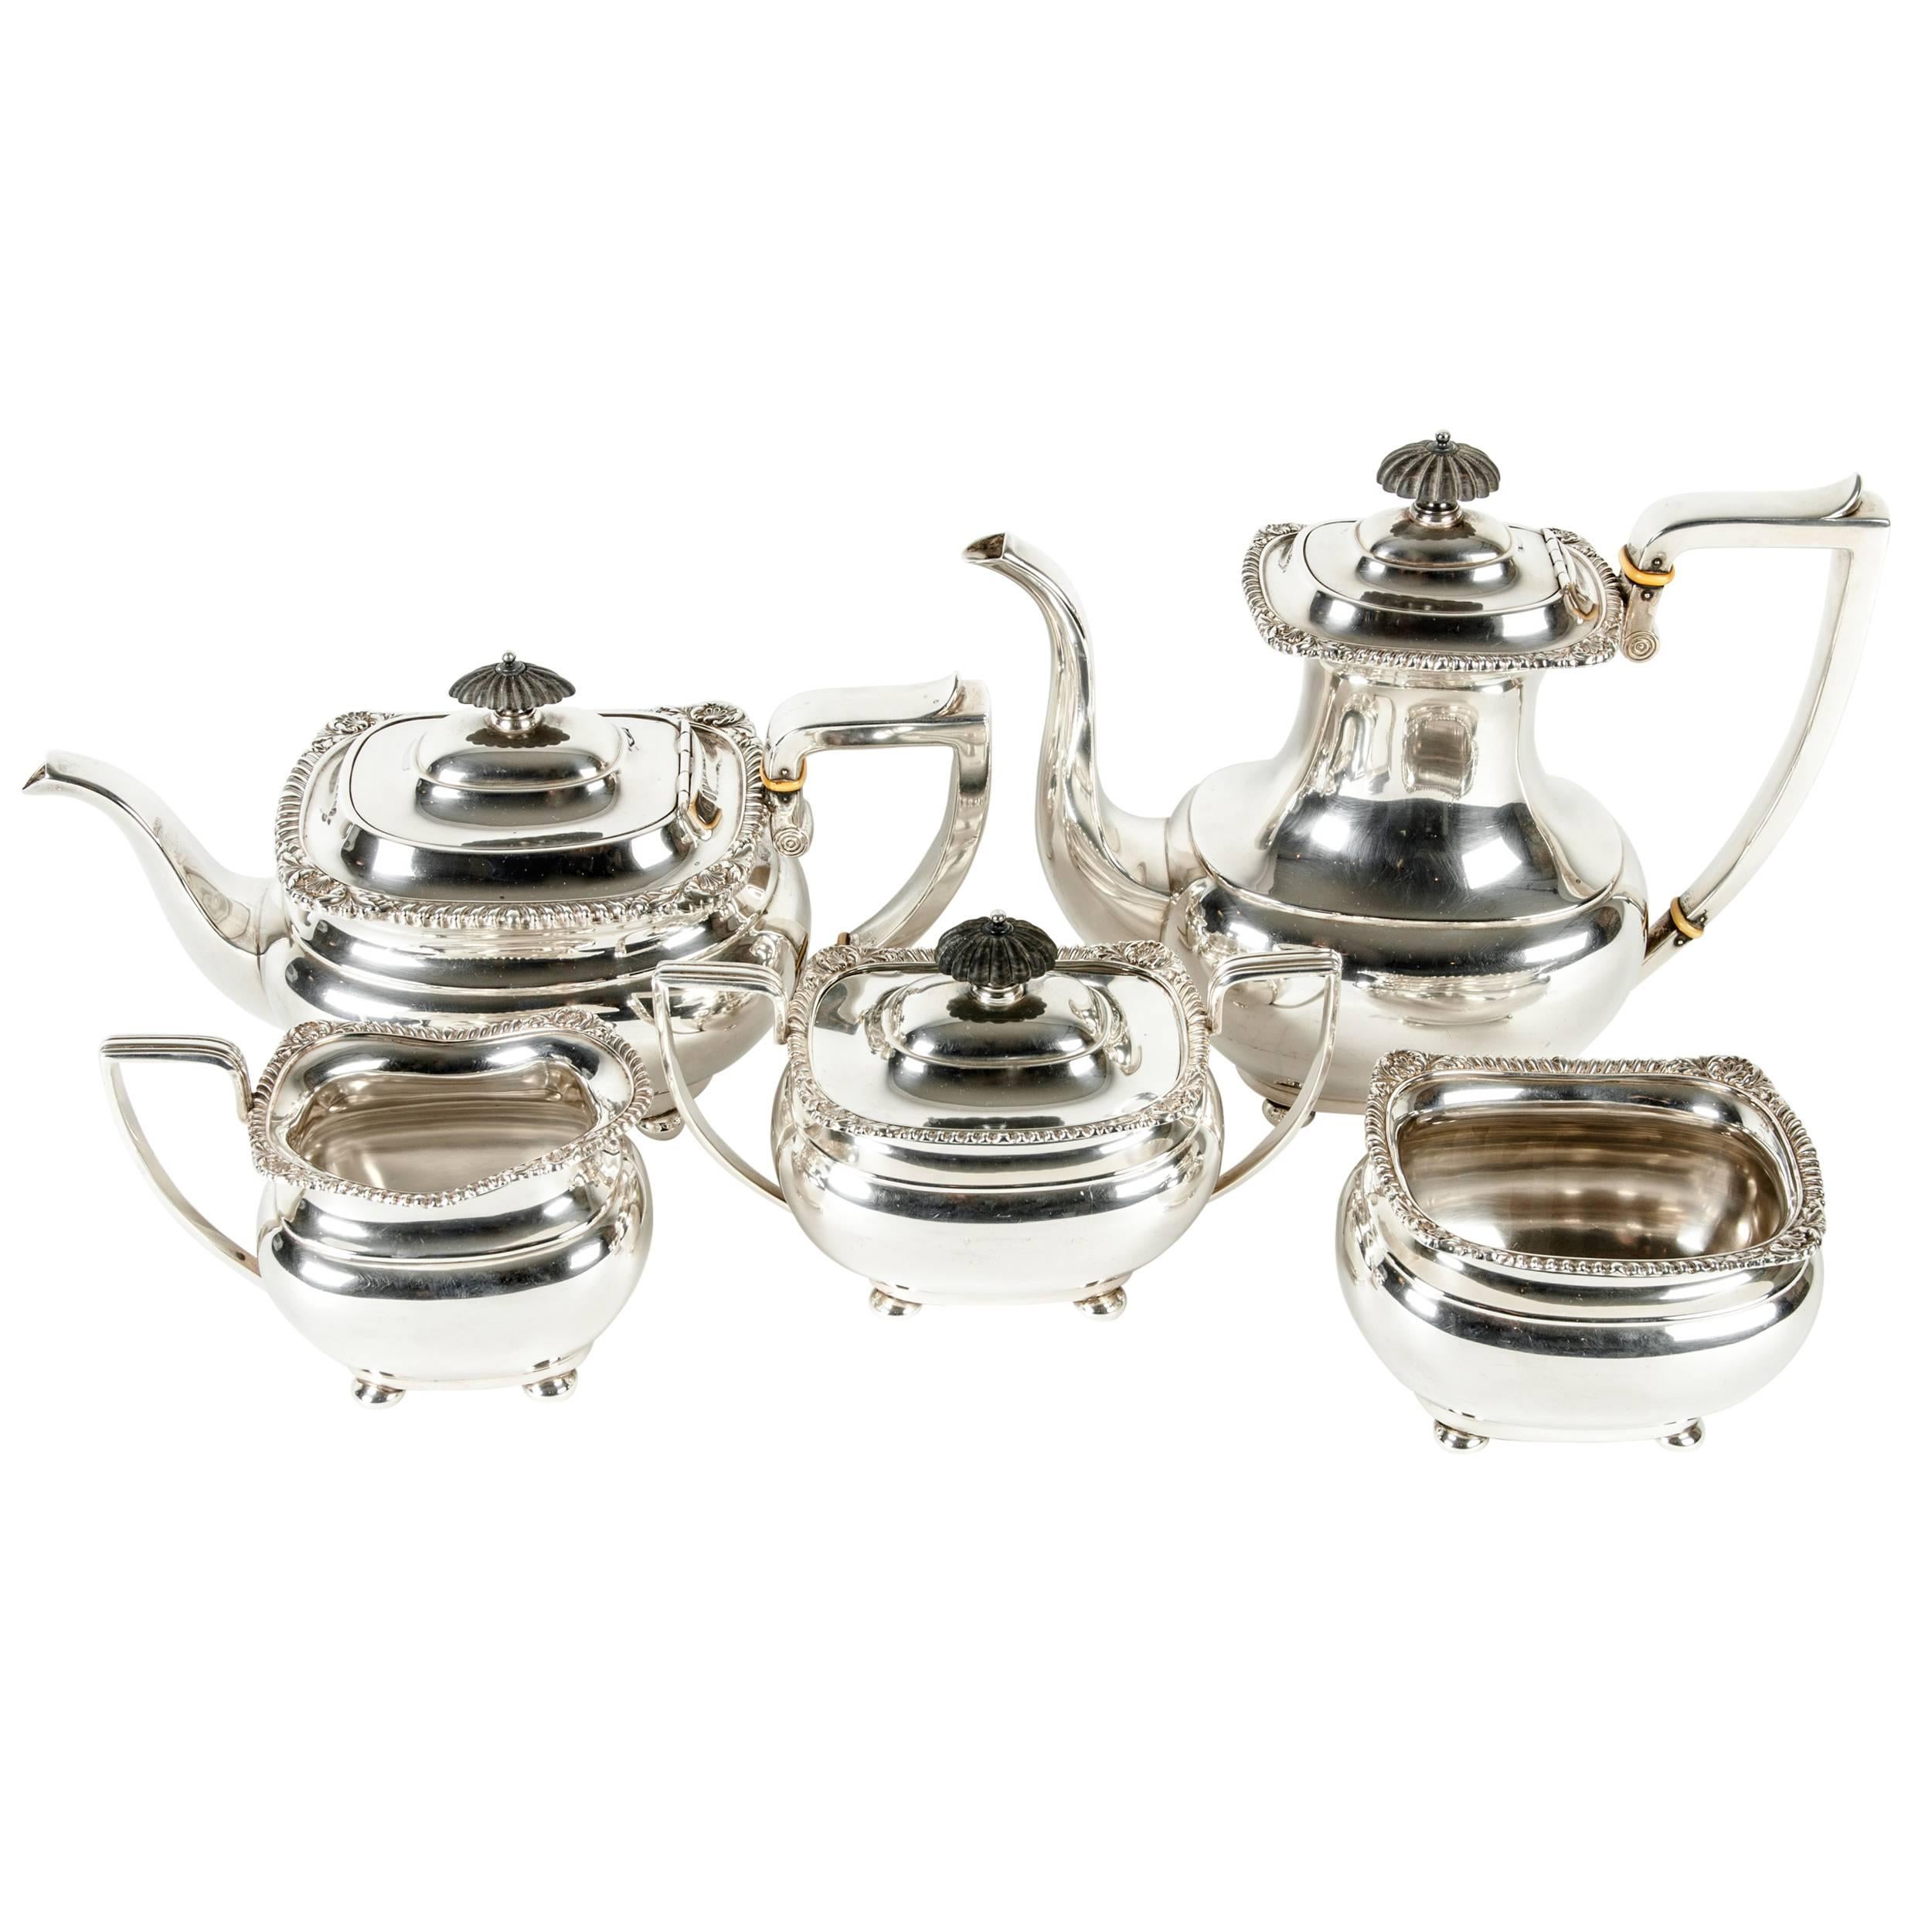 Antique Sterling Silver Tea and Coffee Service